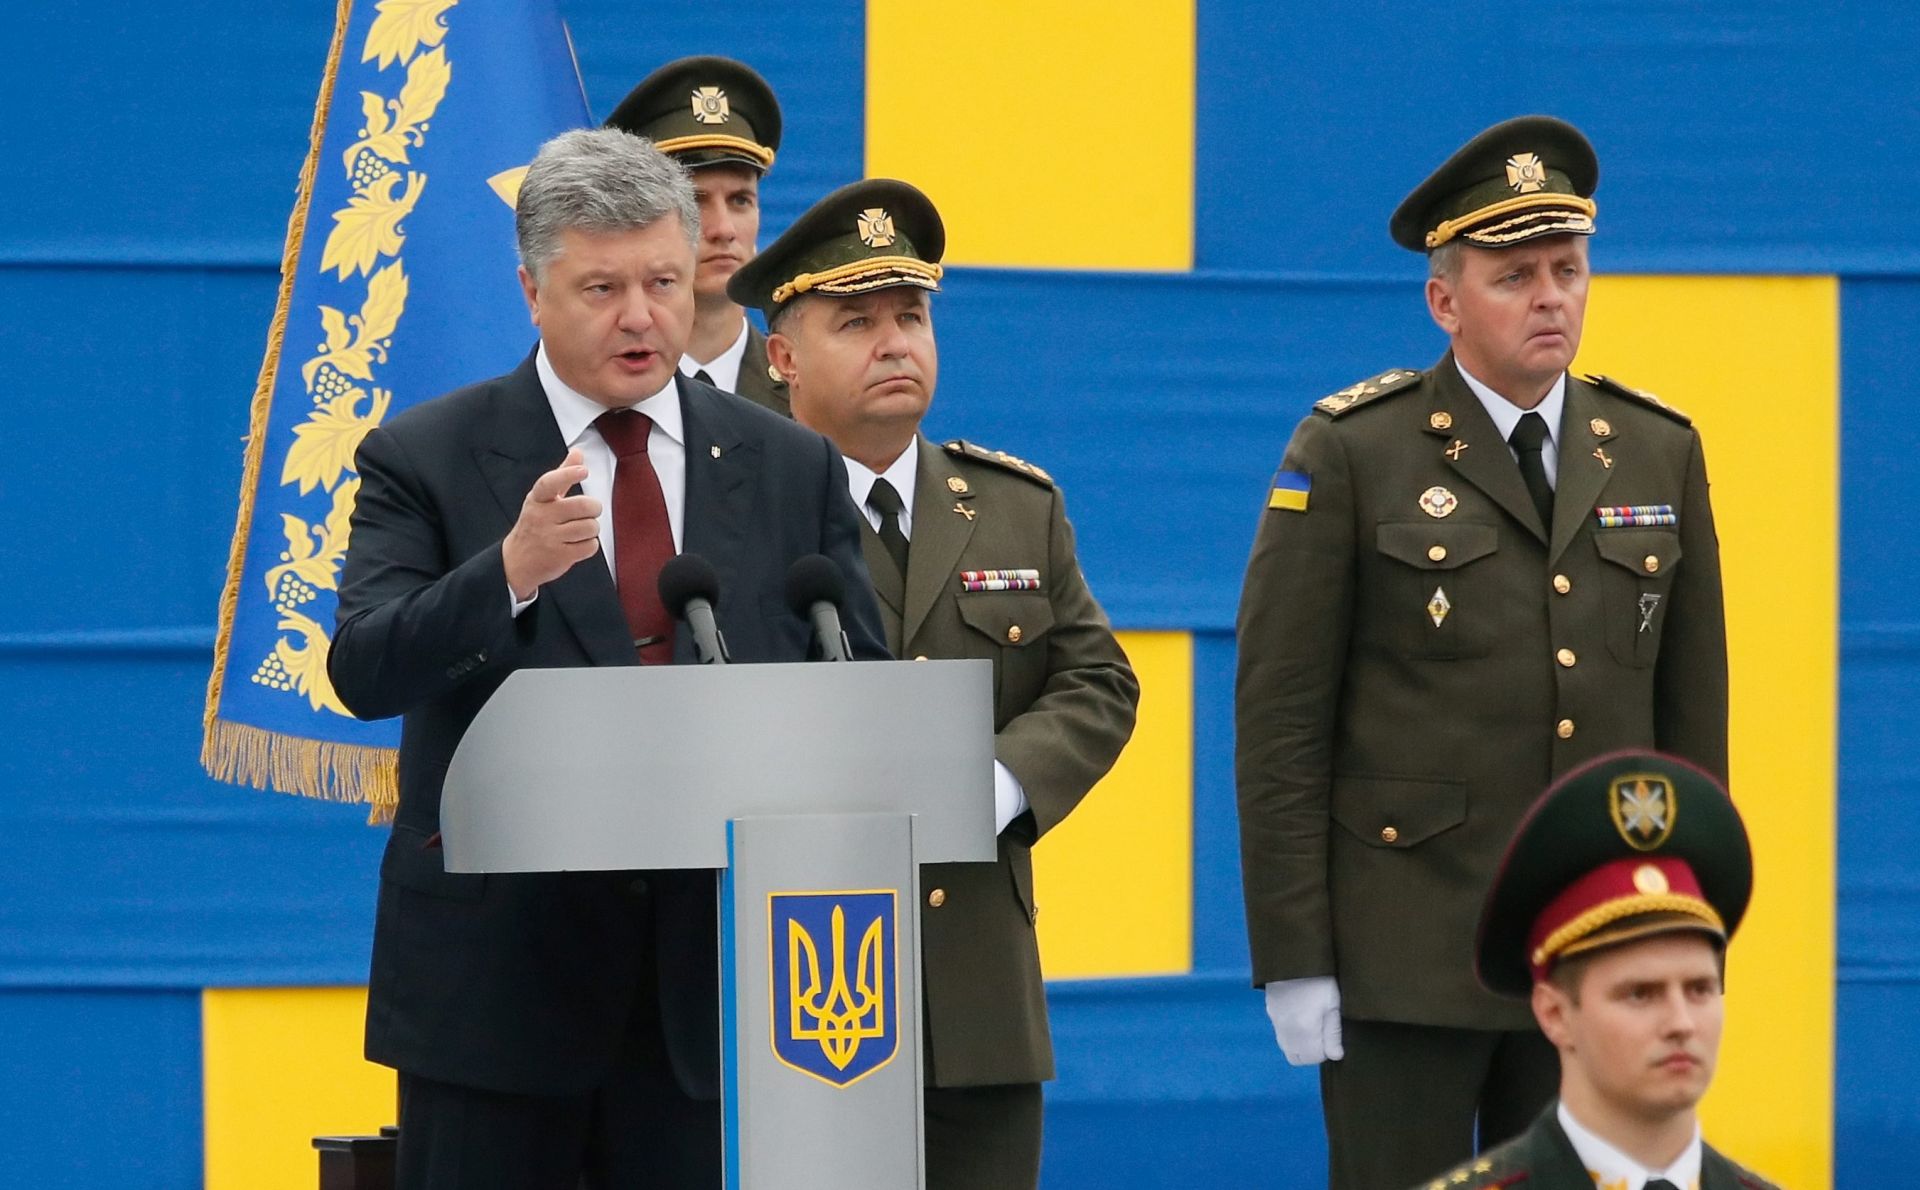 epa05508492 Ukrainian President Petro Poroshenko (L) speaks on the Kiev's Independence Square, Ukraine, 24 August 2016, during a military parade on the occasion of the country's Independence Day celebrations. Others are not identified. Ukrainians mark the 25th anniversary of Ukraine's independence from the Soviet Union in 1991.  EPA/SERGEY DOLZHENKO